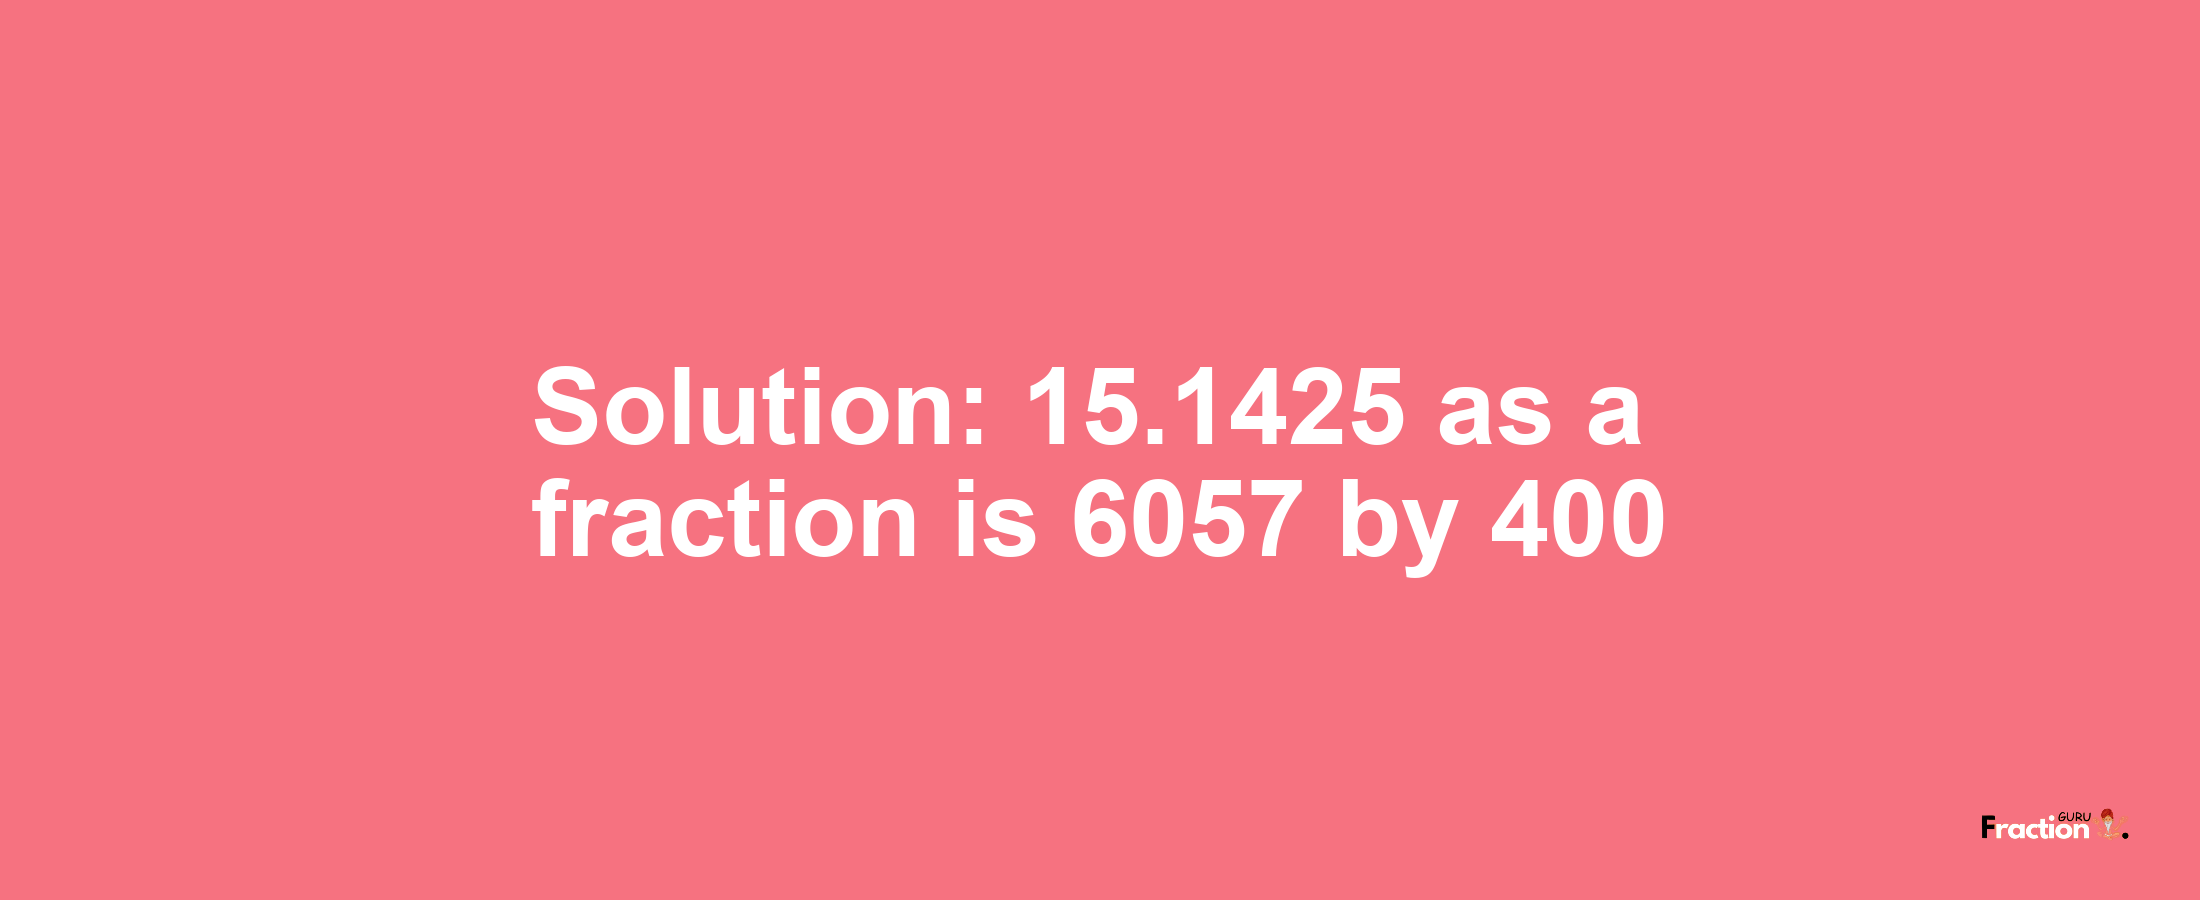 Solution:15.1425 as a fraction is 6057/400